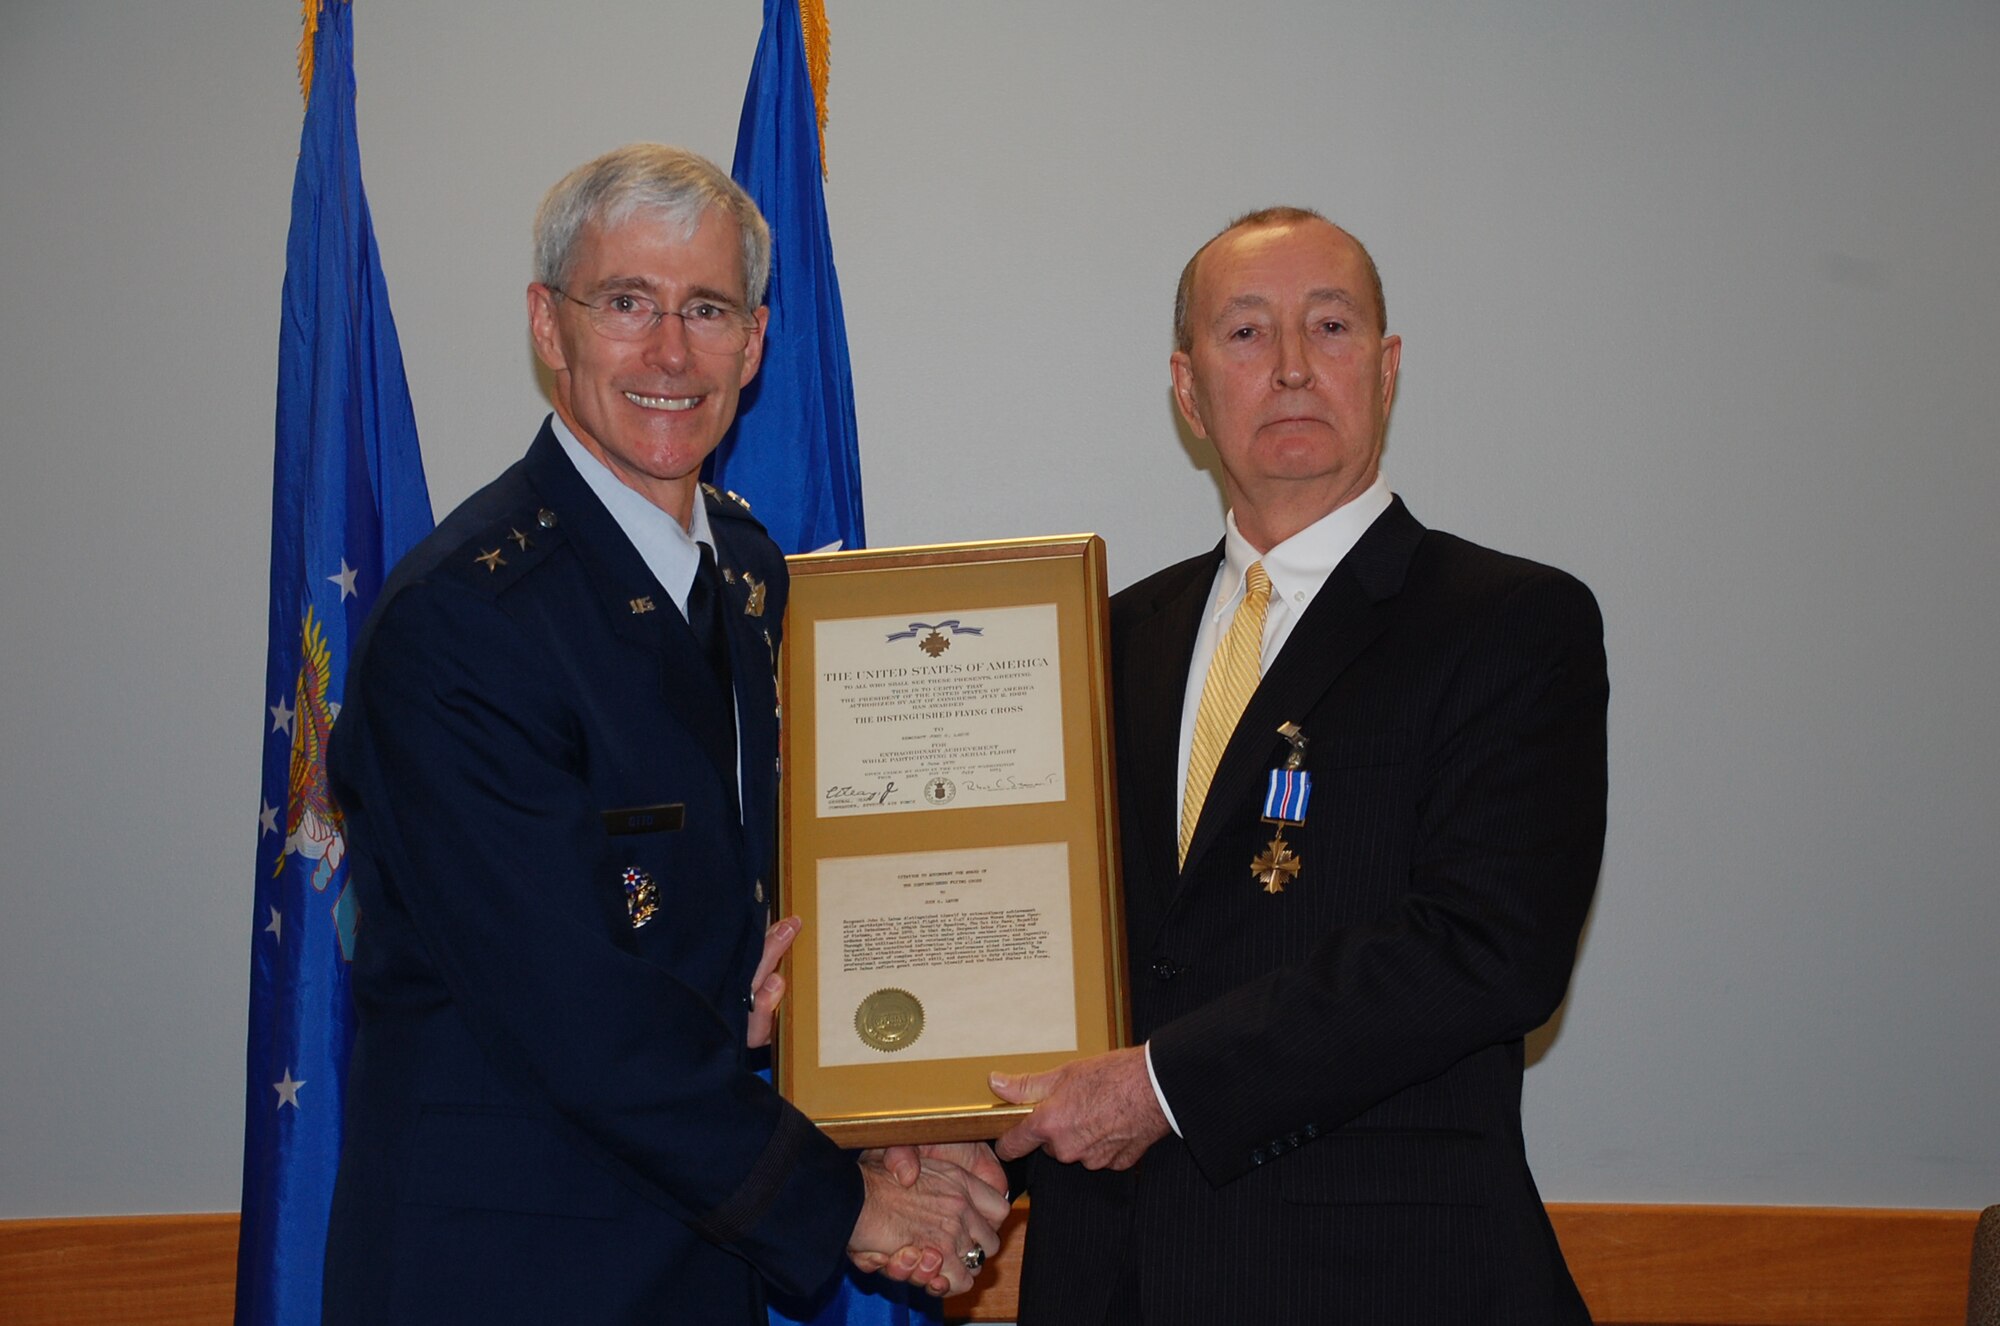 LACKLAND AIR FORCE BASE, Texas -- Maj. Gen. Robert Otto, commander of the Air Force Intelligence, Surveillance and Reconnaissance Agency poses for a photo with John LaHue, chief financial officer at the Air Force Center for Engineering and the Environment, upon presentation of a Distinguished Flying Cross to LaHue during his Dec. 22 retirement ceremony.  LaHue received the award in the mail in 1970 for his service in Vietnam, but was not formally presented the award until today.